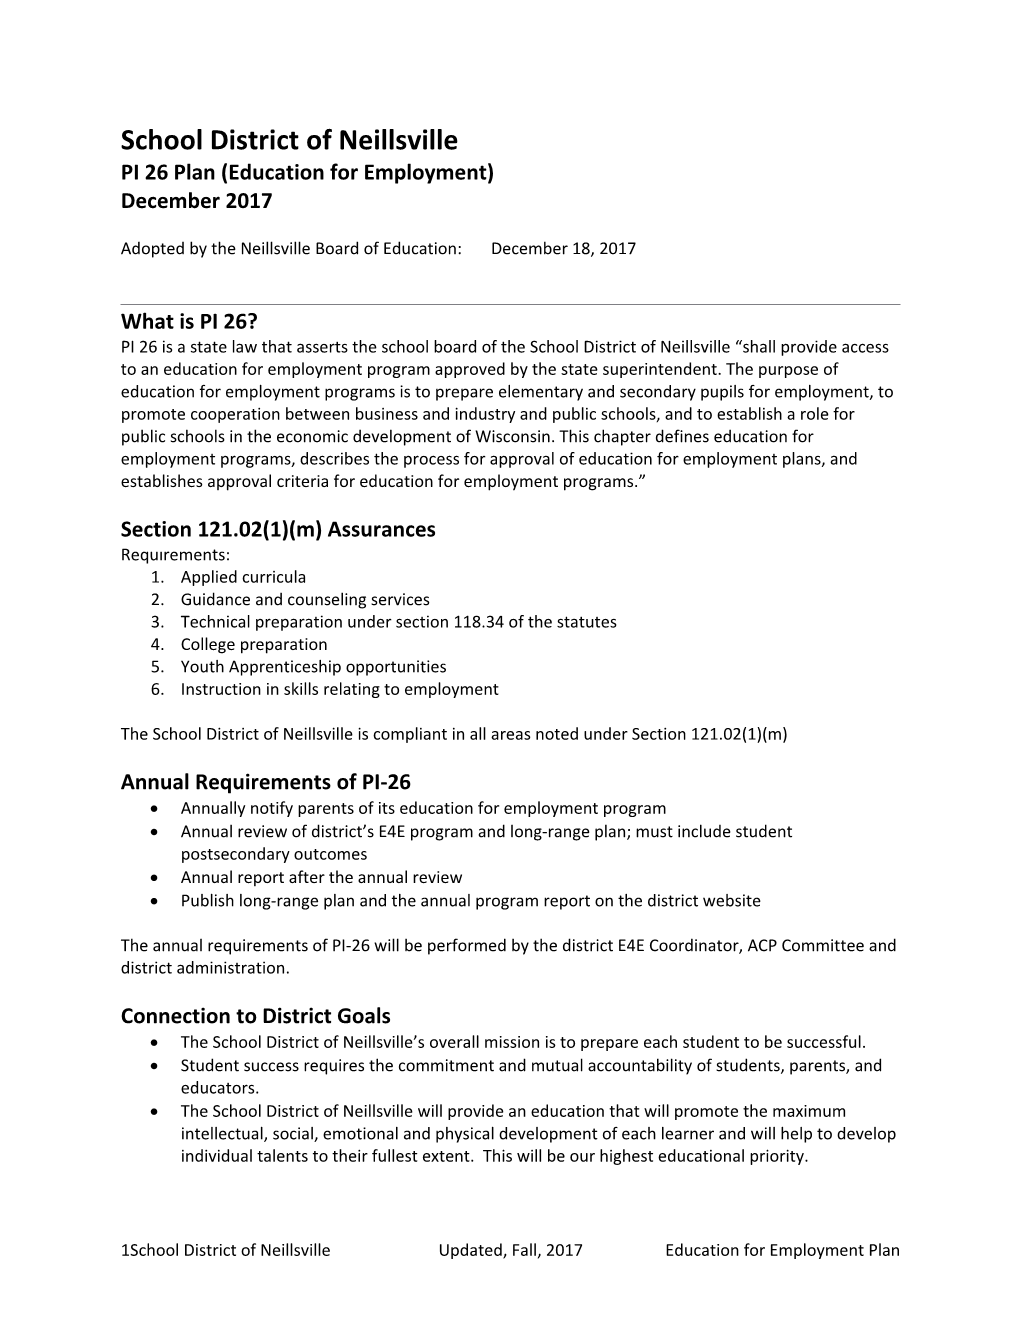 PI 26 Plan(Education for Employment)